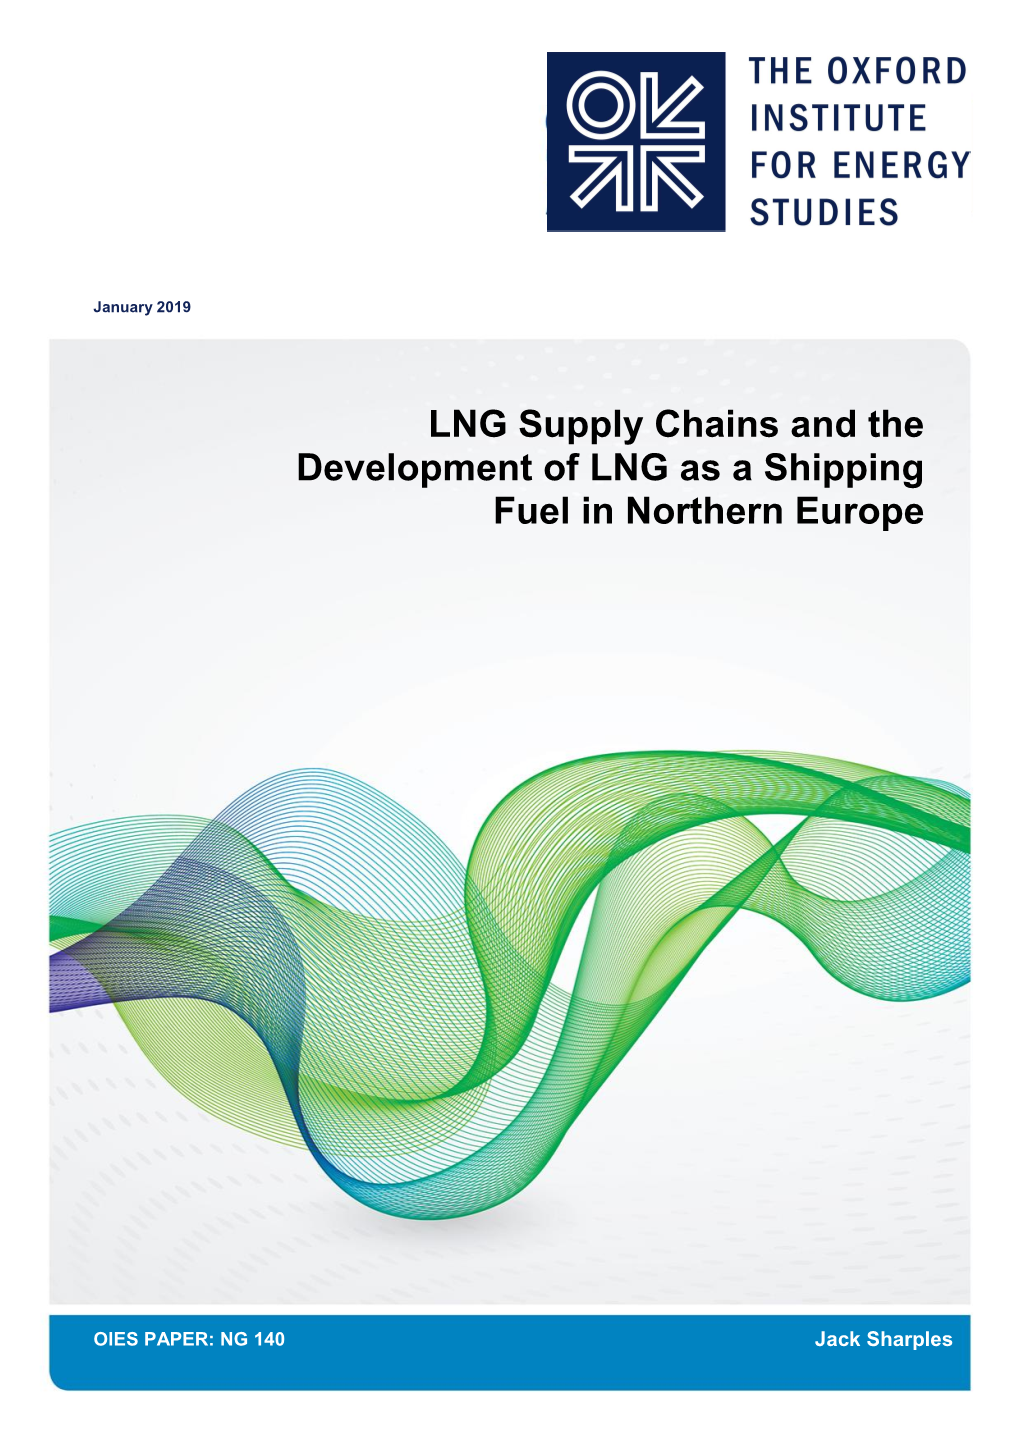 LNG Supply Chains and the Development of LNG As a Shipping Fuel in Northern Europe